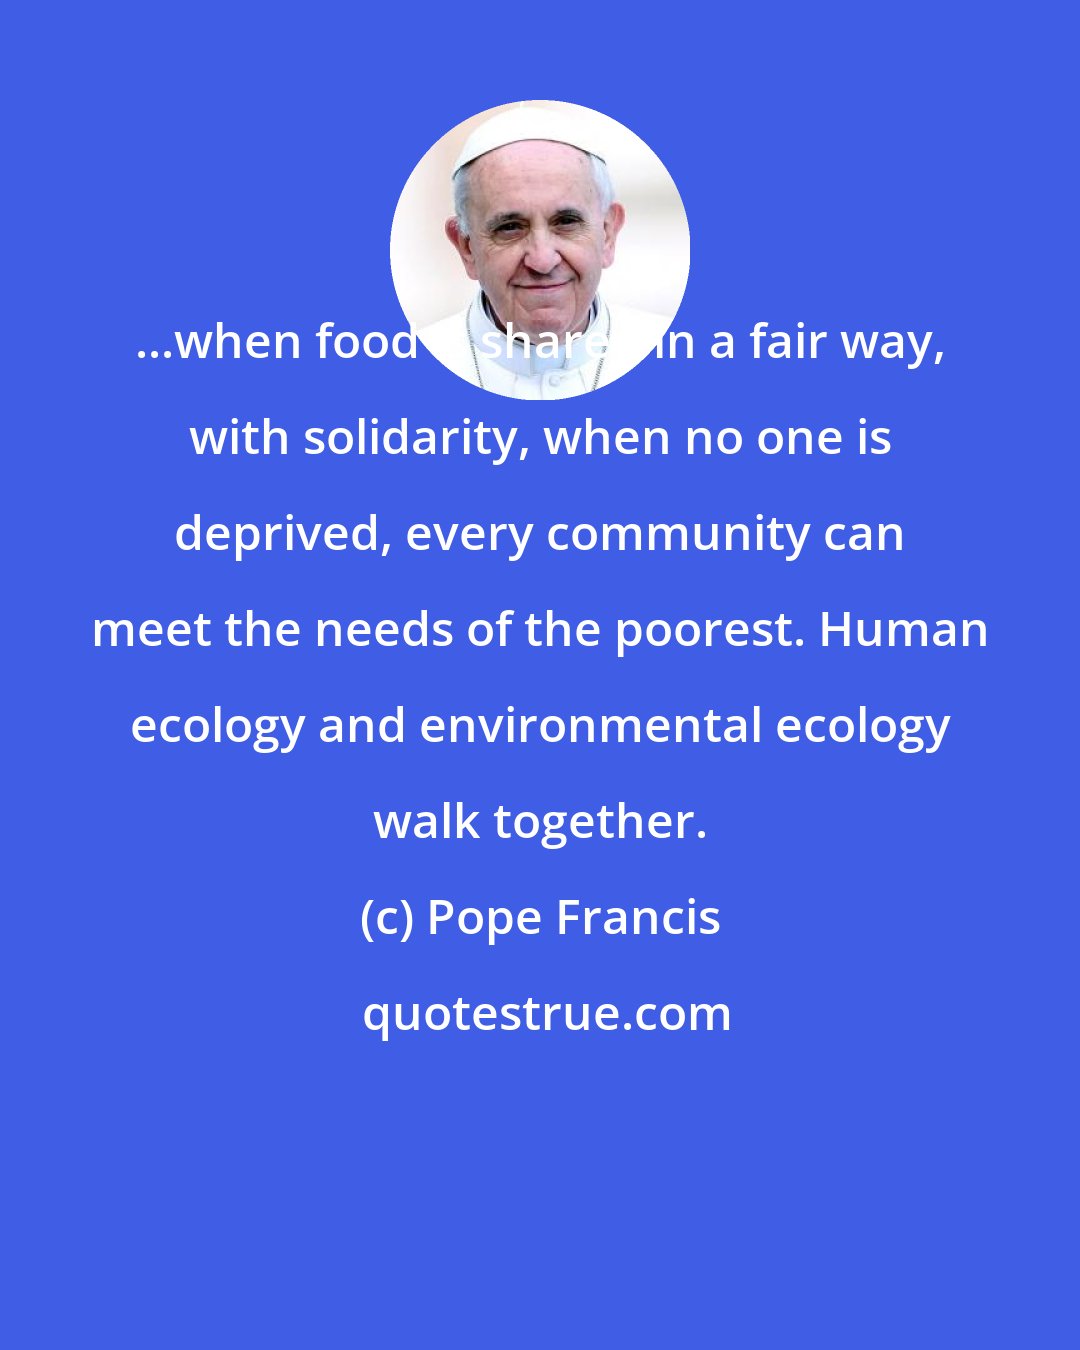 Pope Francis: ...when food is shared in a fair way, with solidarity, when no one is deprived, every community can meet the needs of the poorest. Human ecology and environmental ecology walk together.